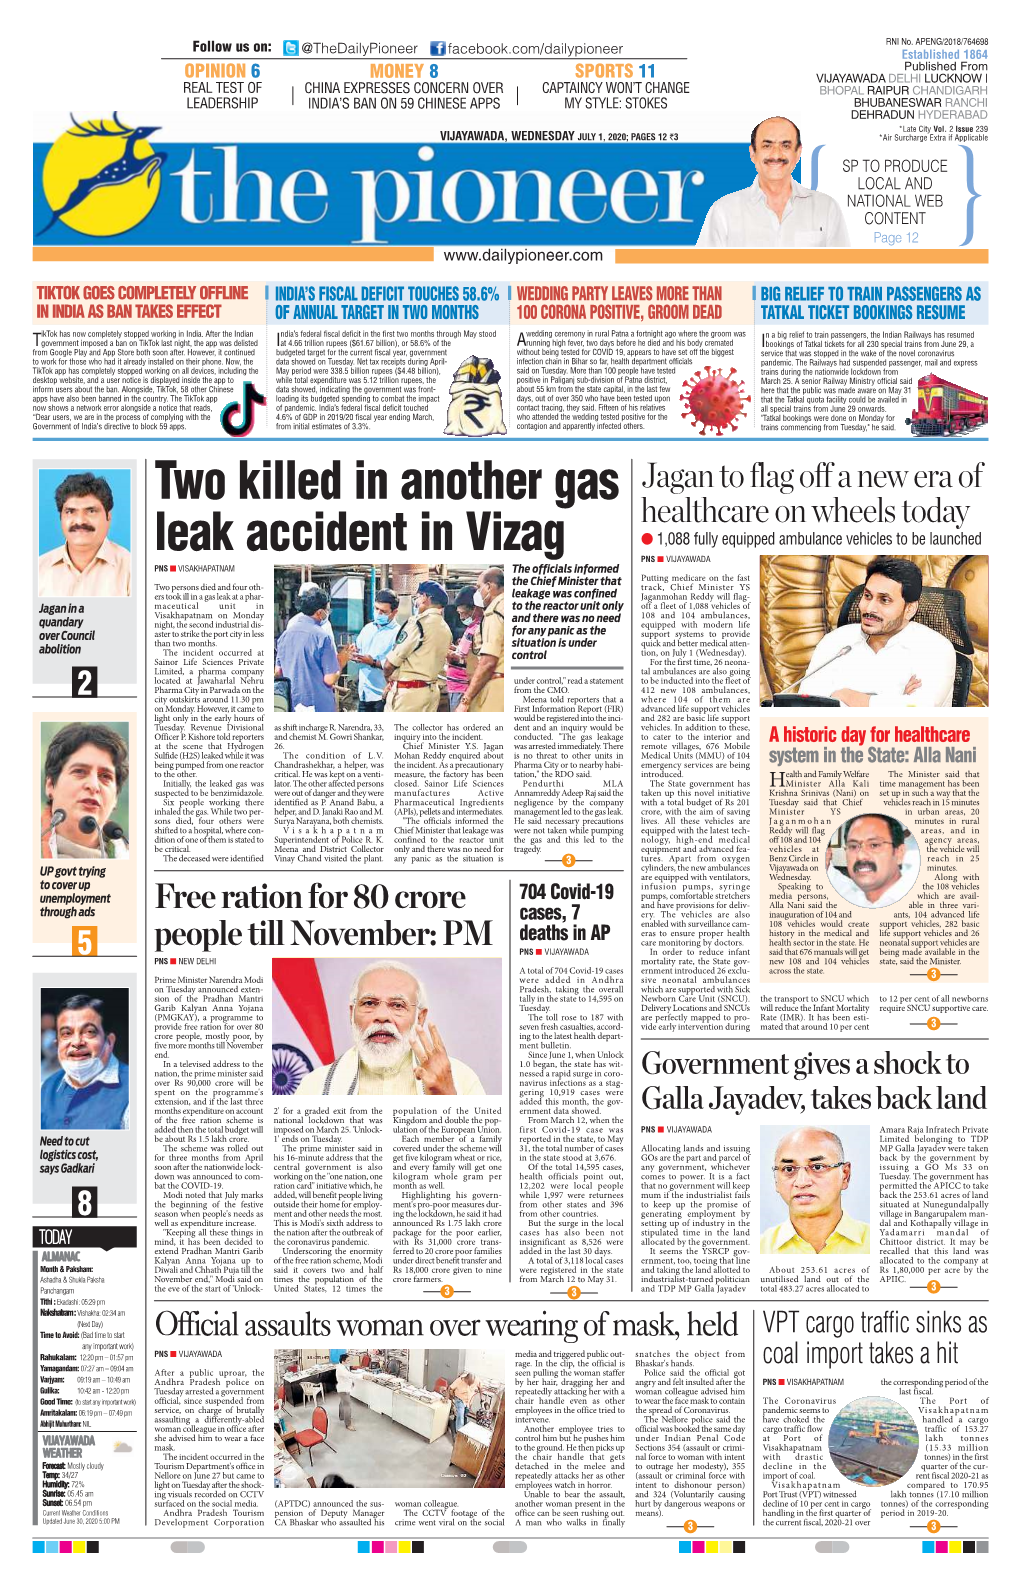 Two Killed in Another Gas Leak Accident in Vizag